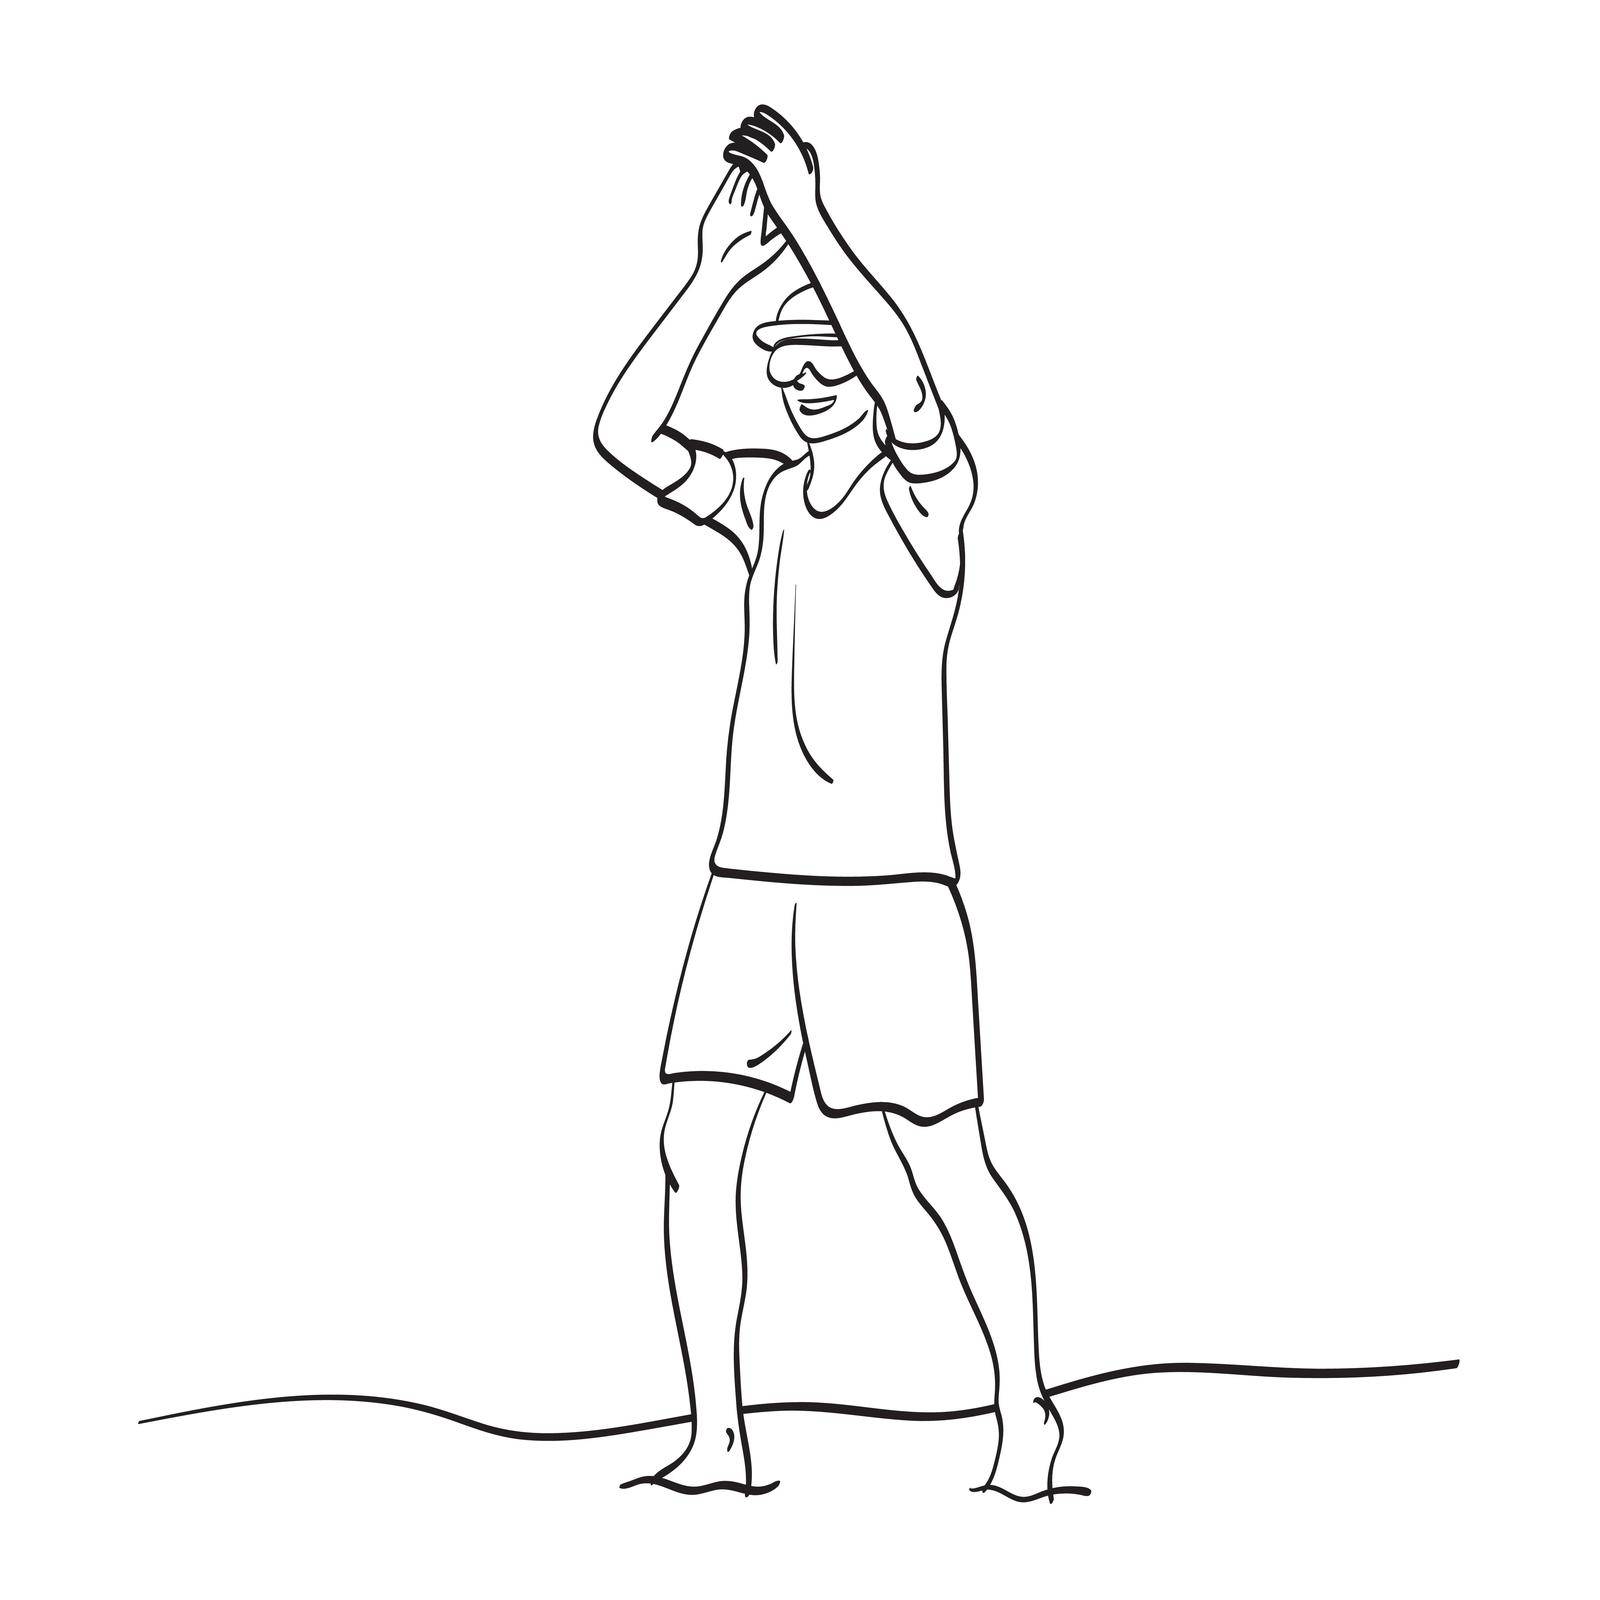 line art full length of beach volleyball player crapping his hands after winning the game illustration vector hand drawn isolated on white background